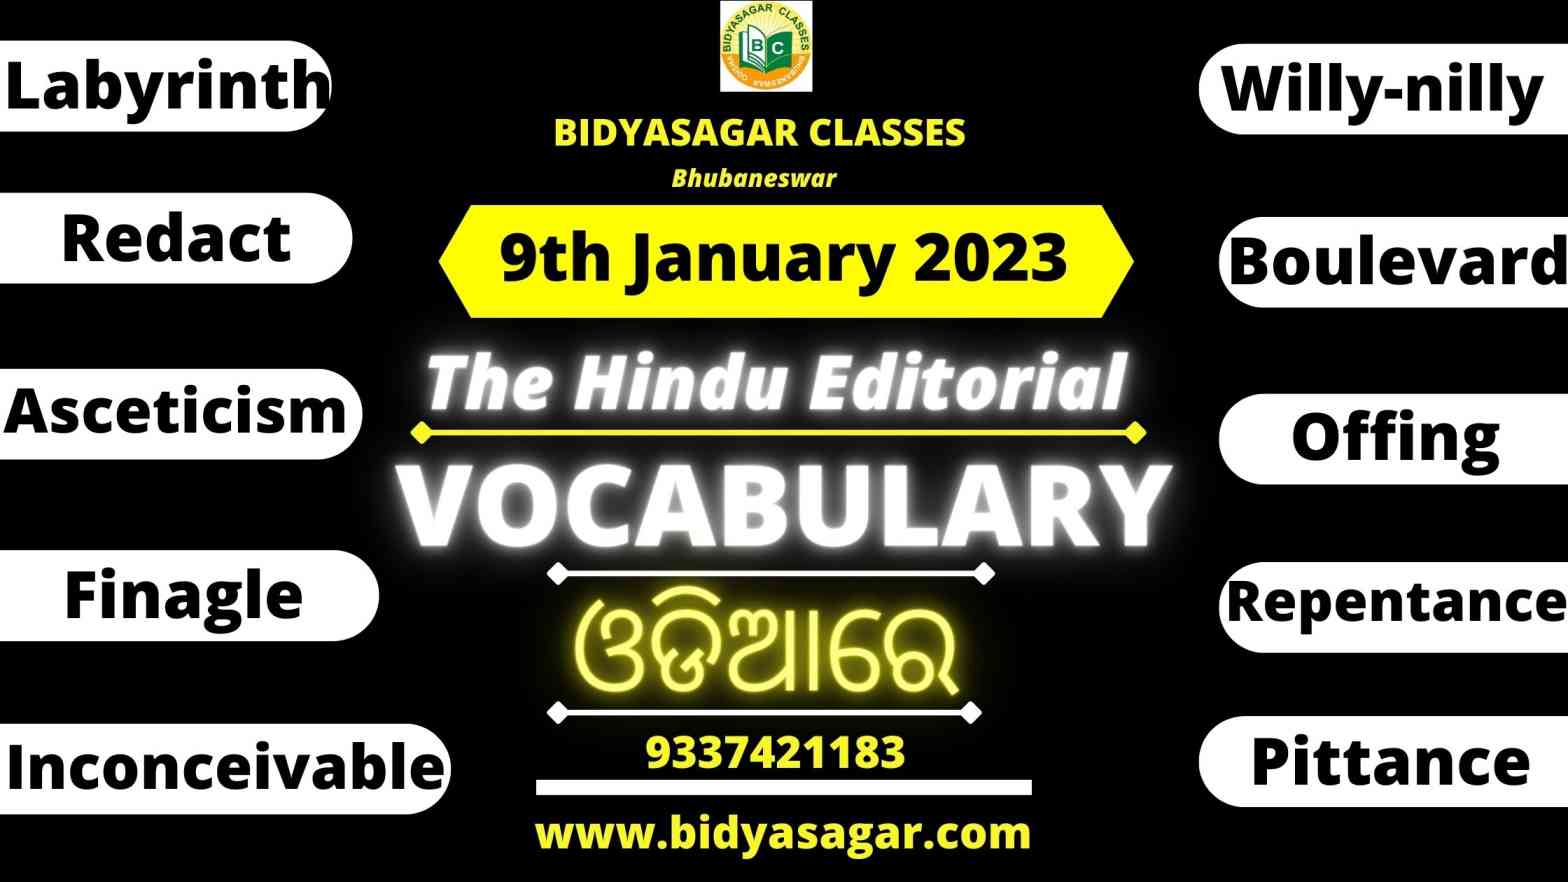 The Hindu Editorial Vocabulary of 9th January 2023